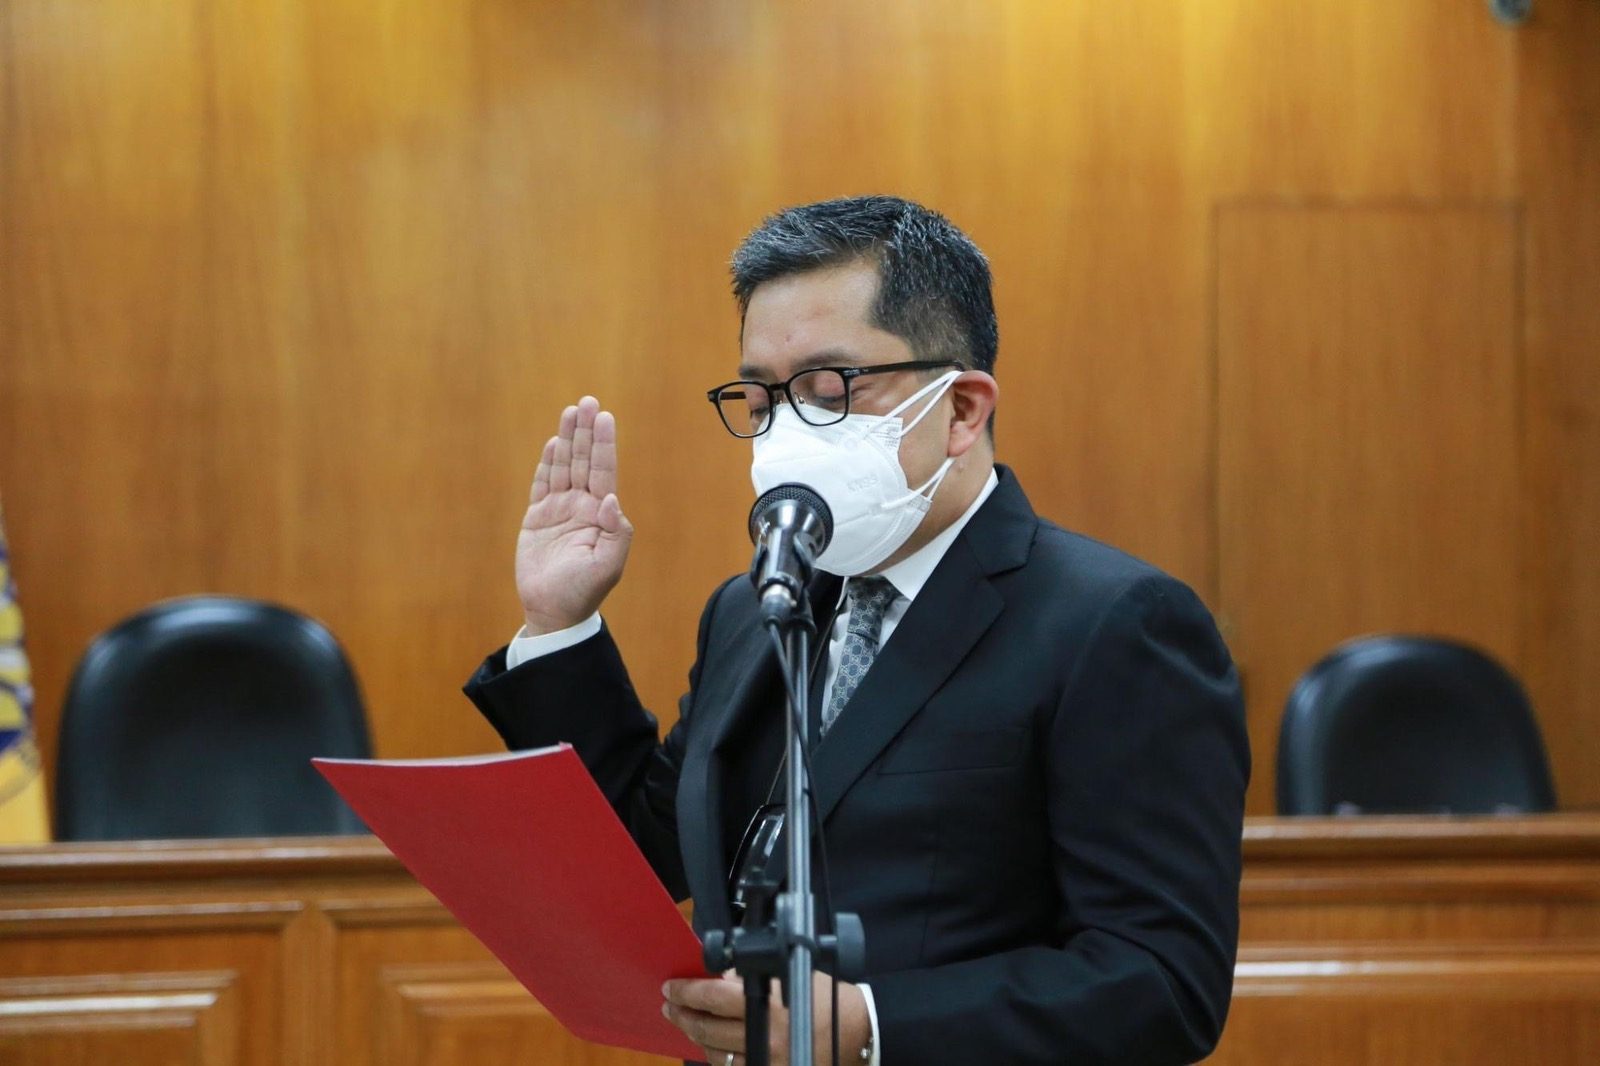 Ex-Marcos lawyer George Garcia inhibits from aspirant’s cases in Comelec